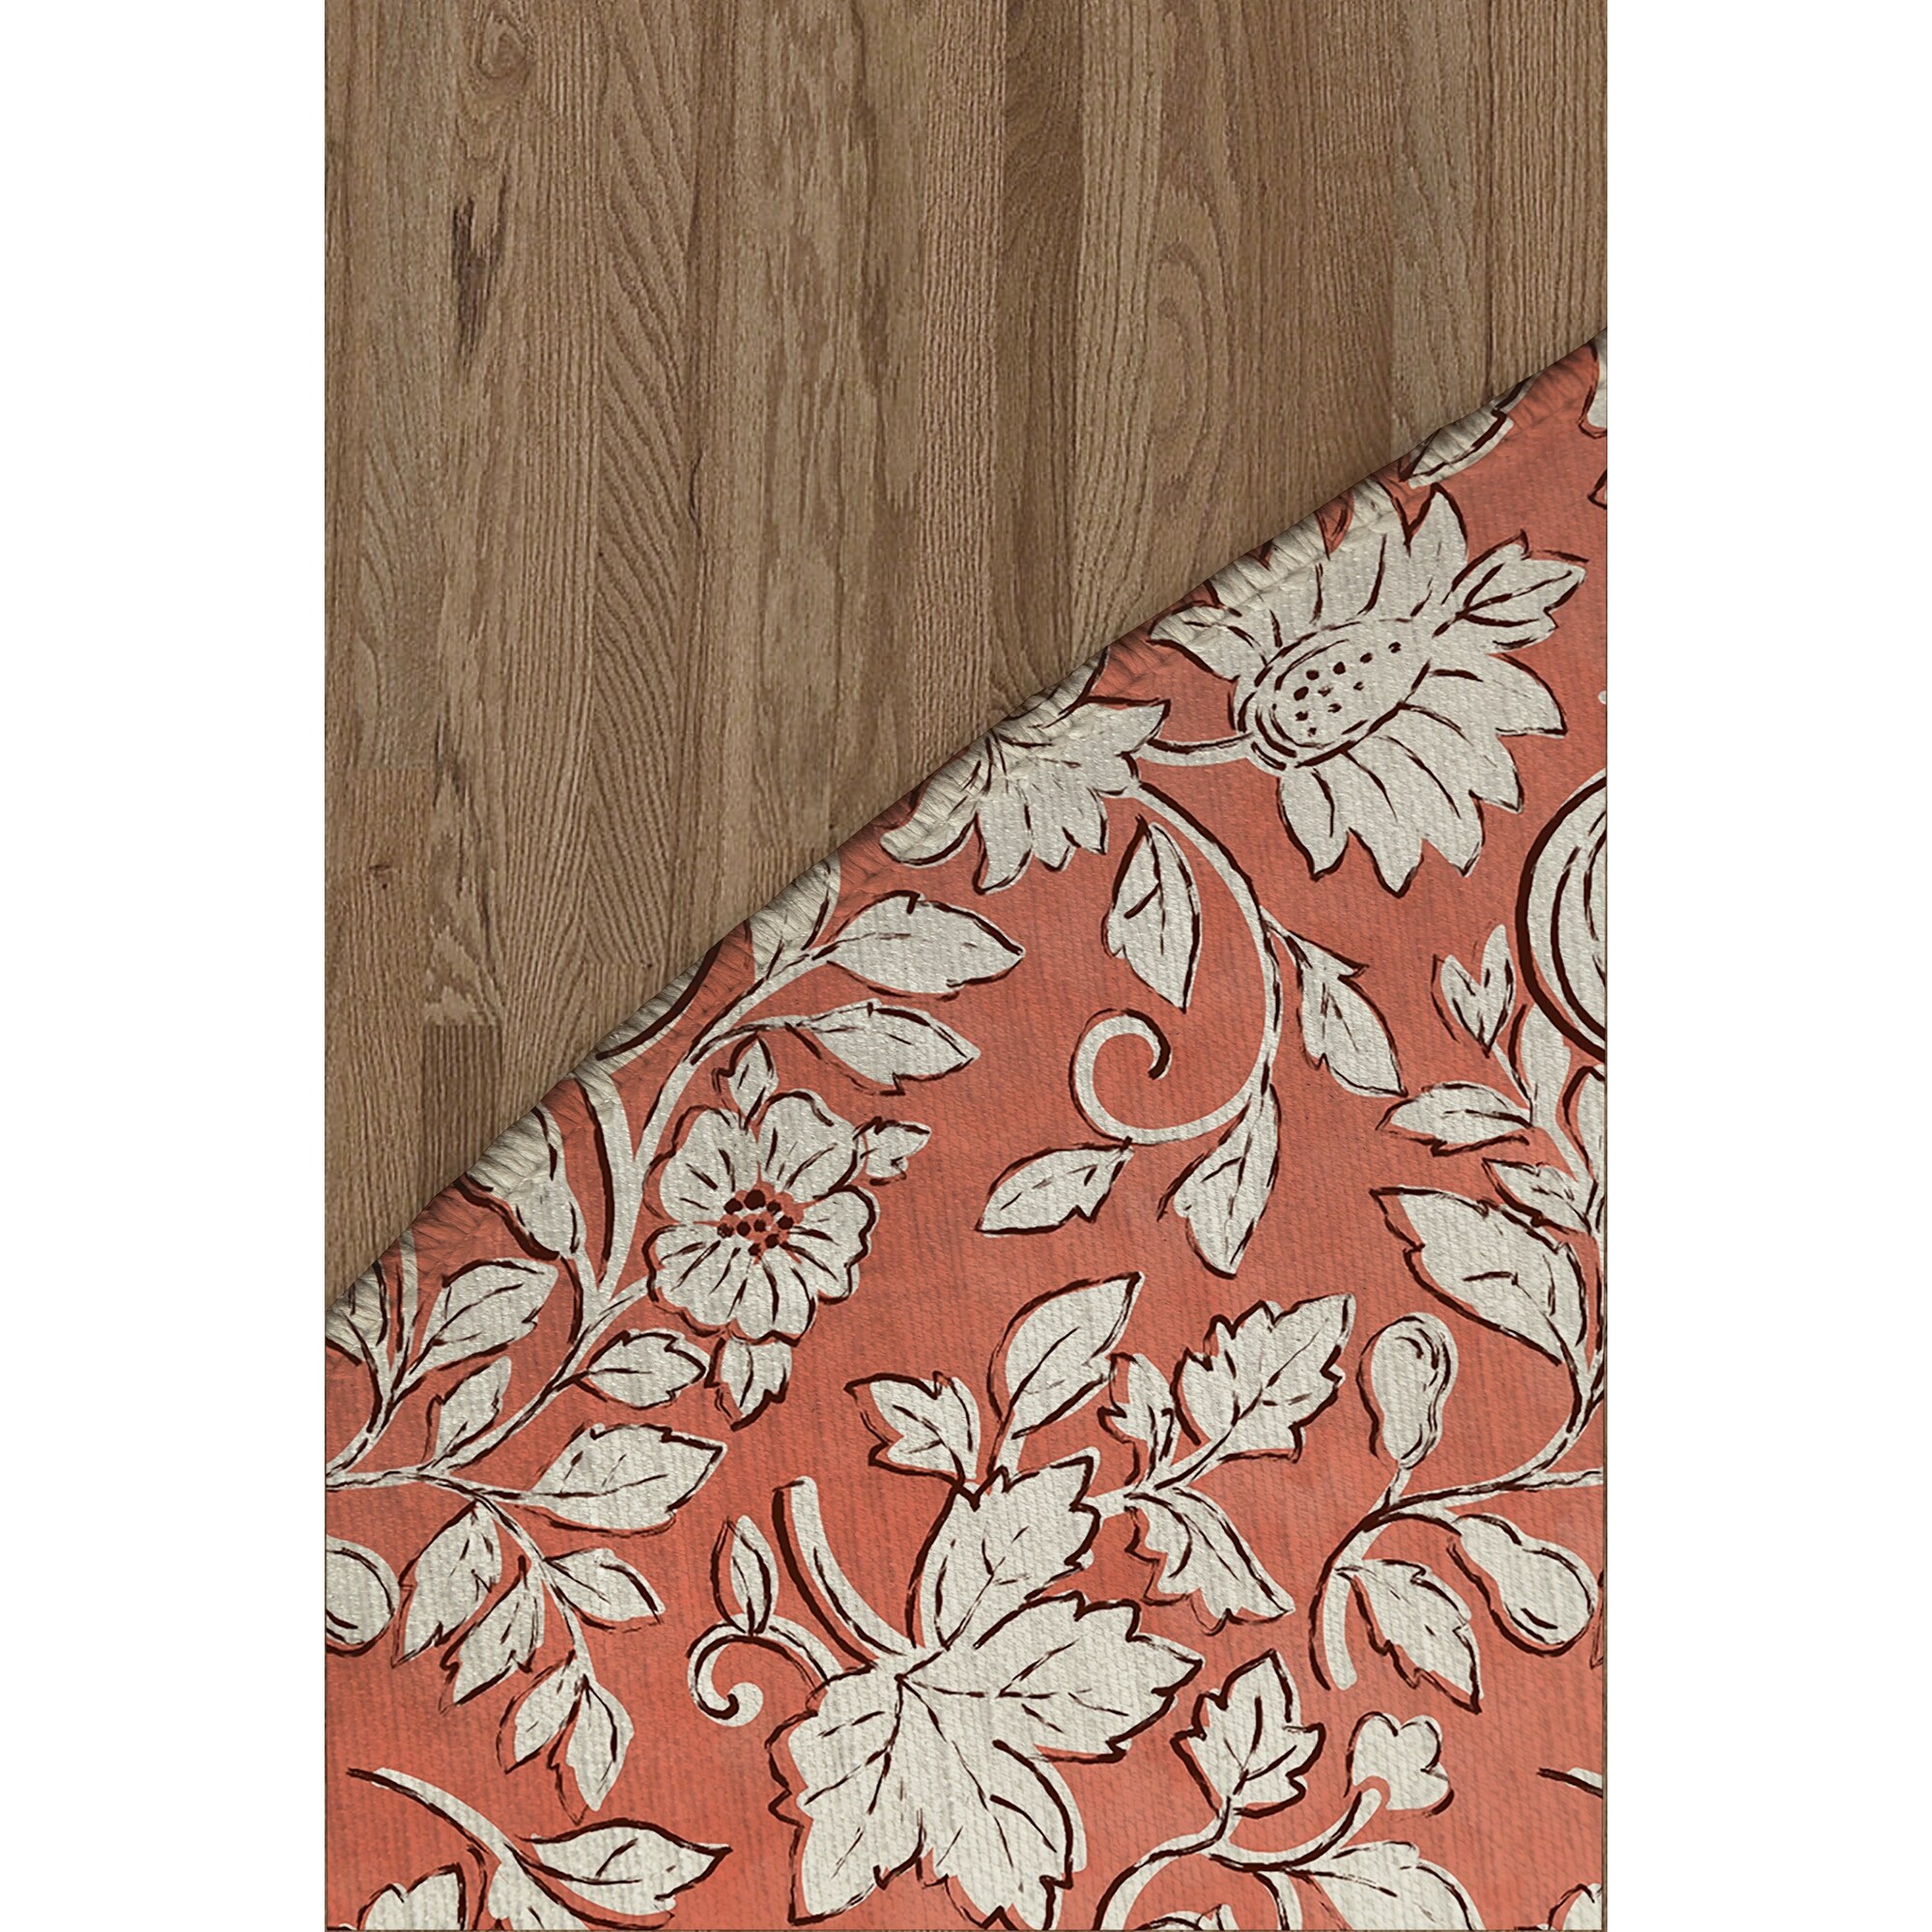 https://ak1.ostkcdn.com/images/products/is/images/direct/59f3a4122d326e922098ea907c6085468fdb2822/POMEGRANATE-BURNT-UMBER-LARGE-Indoor-Floor-Mat-By-Kavka-Designs.jpg